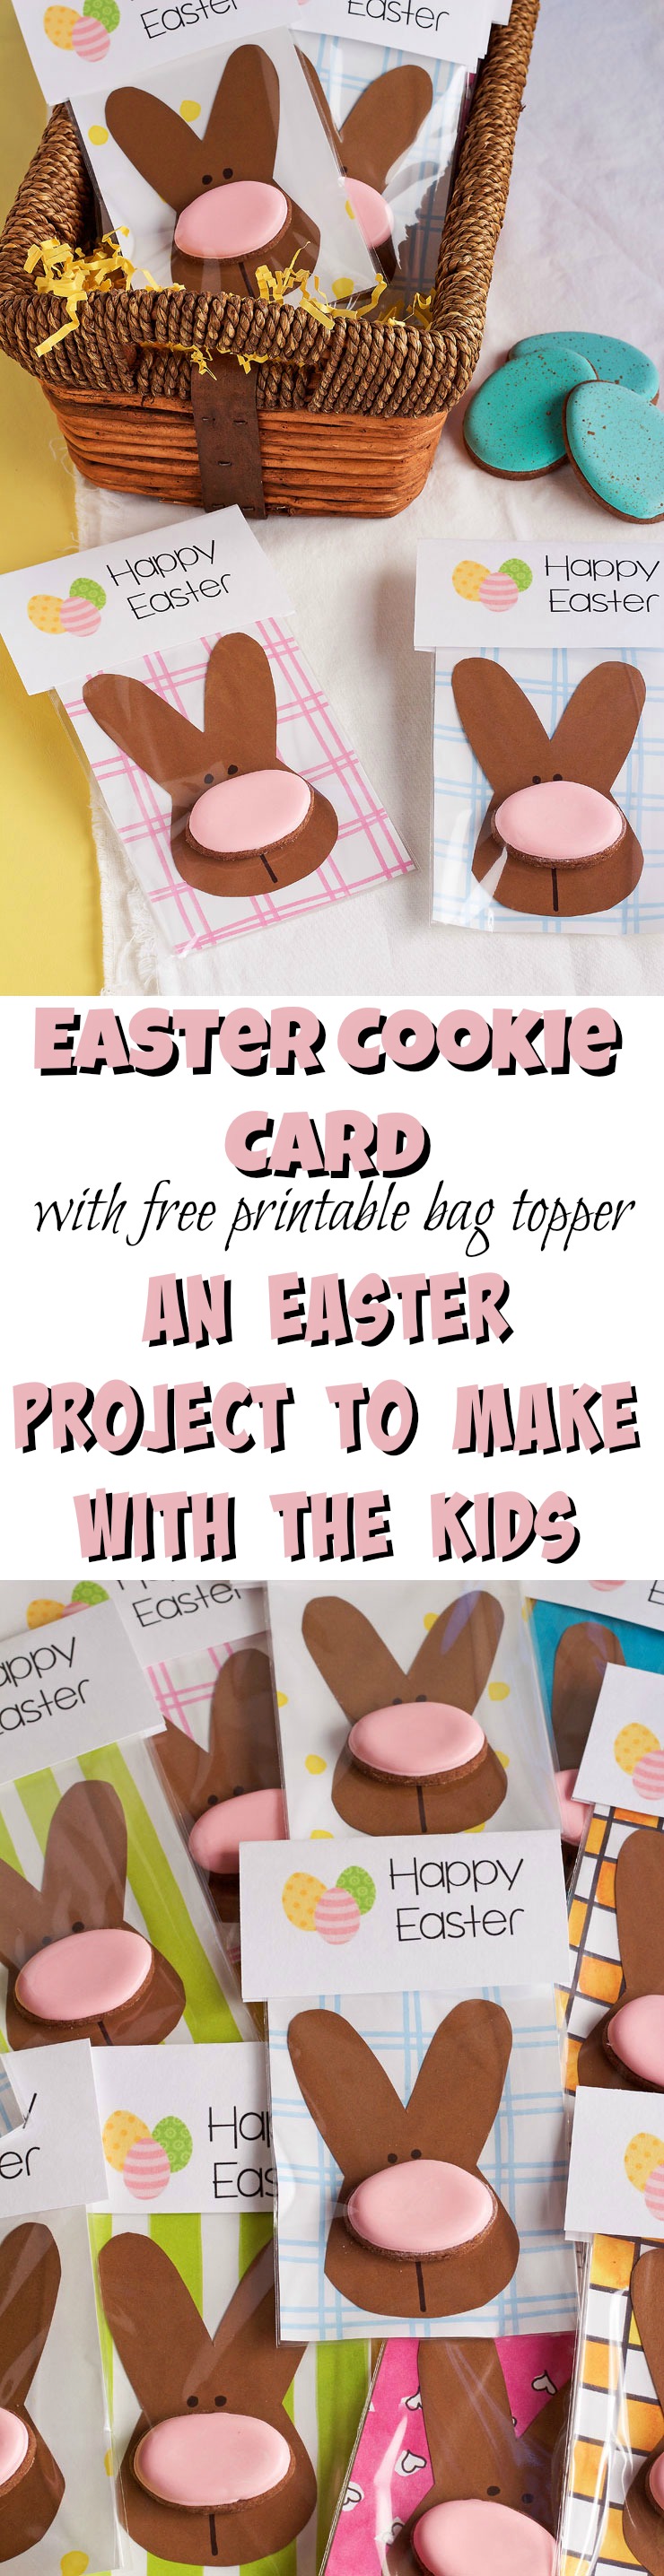 Looking for an Easter Project to Make with the KIDS Make an Easter Cookie Card for Grandparents and Classmates. via www.thebearfootbaker.com